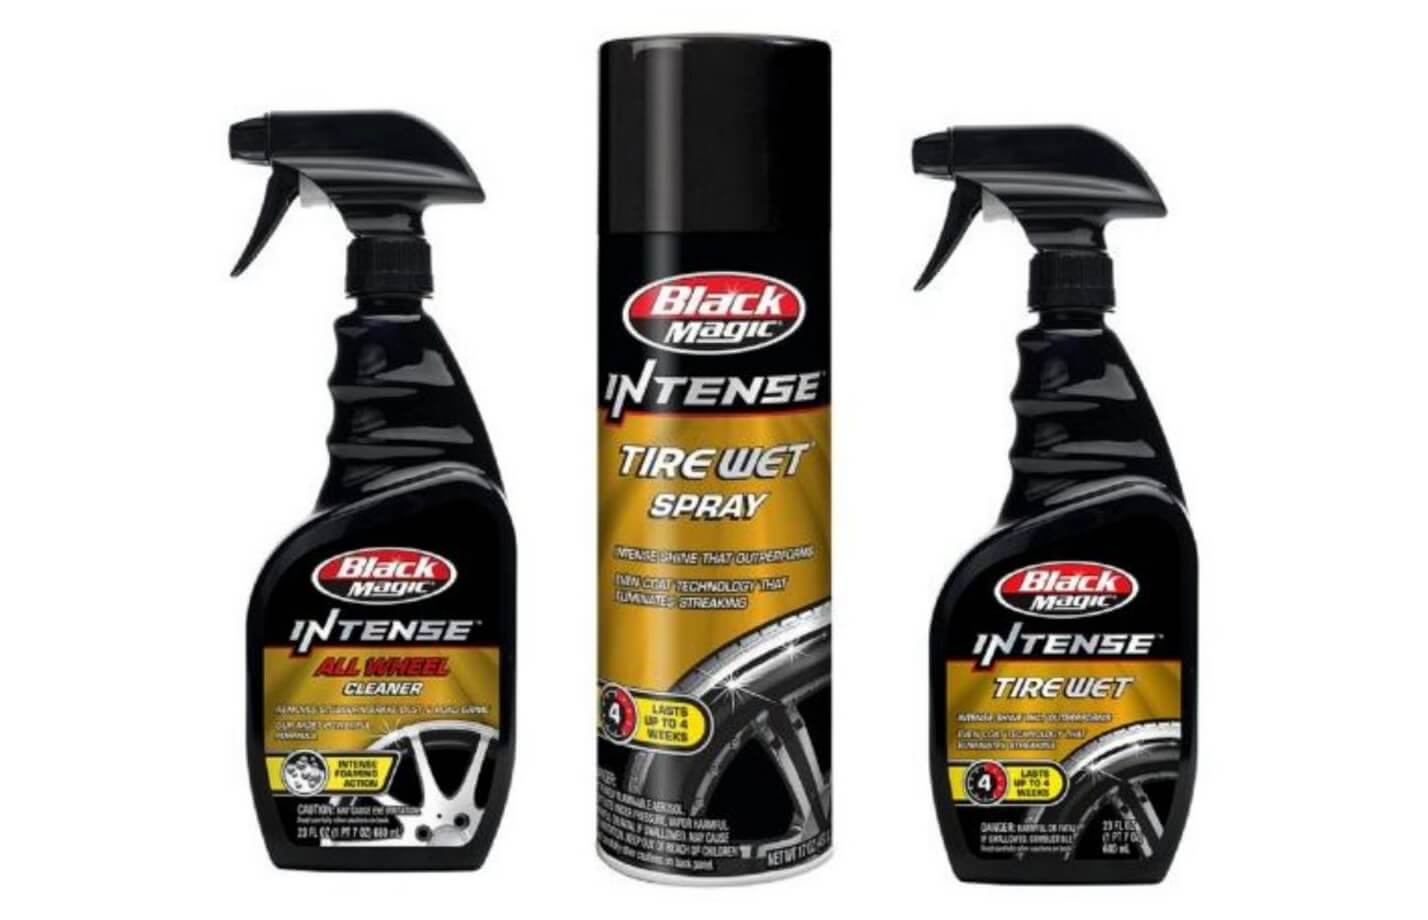 free-black-magic-intense-tire-products-after-rebate-free-samples